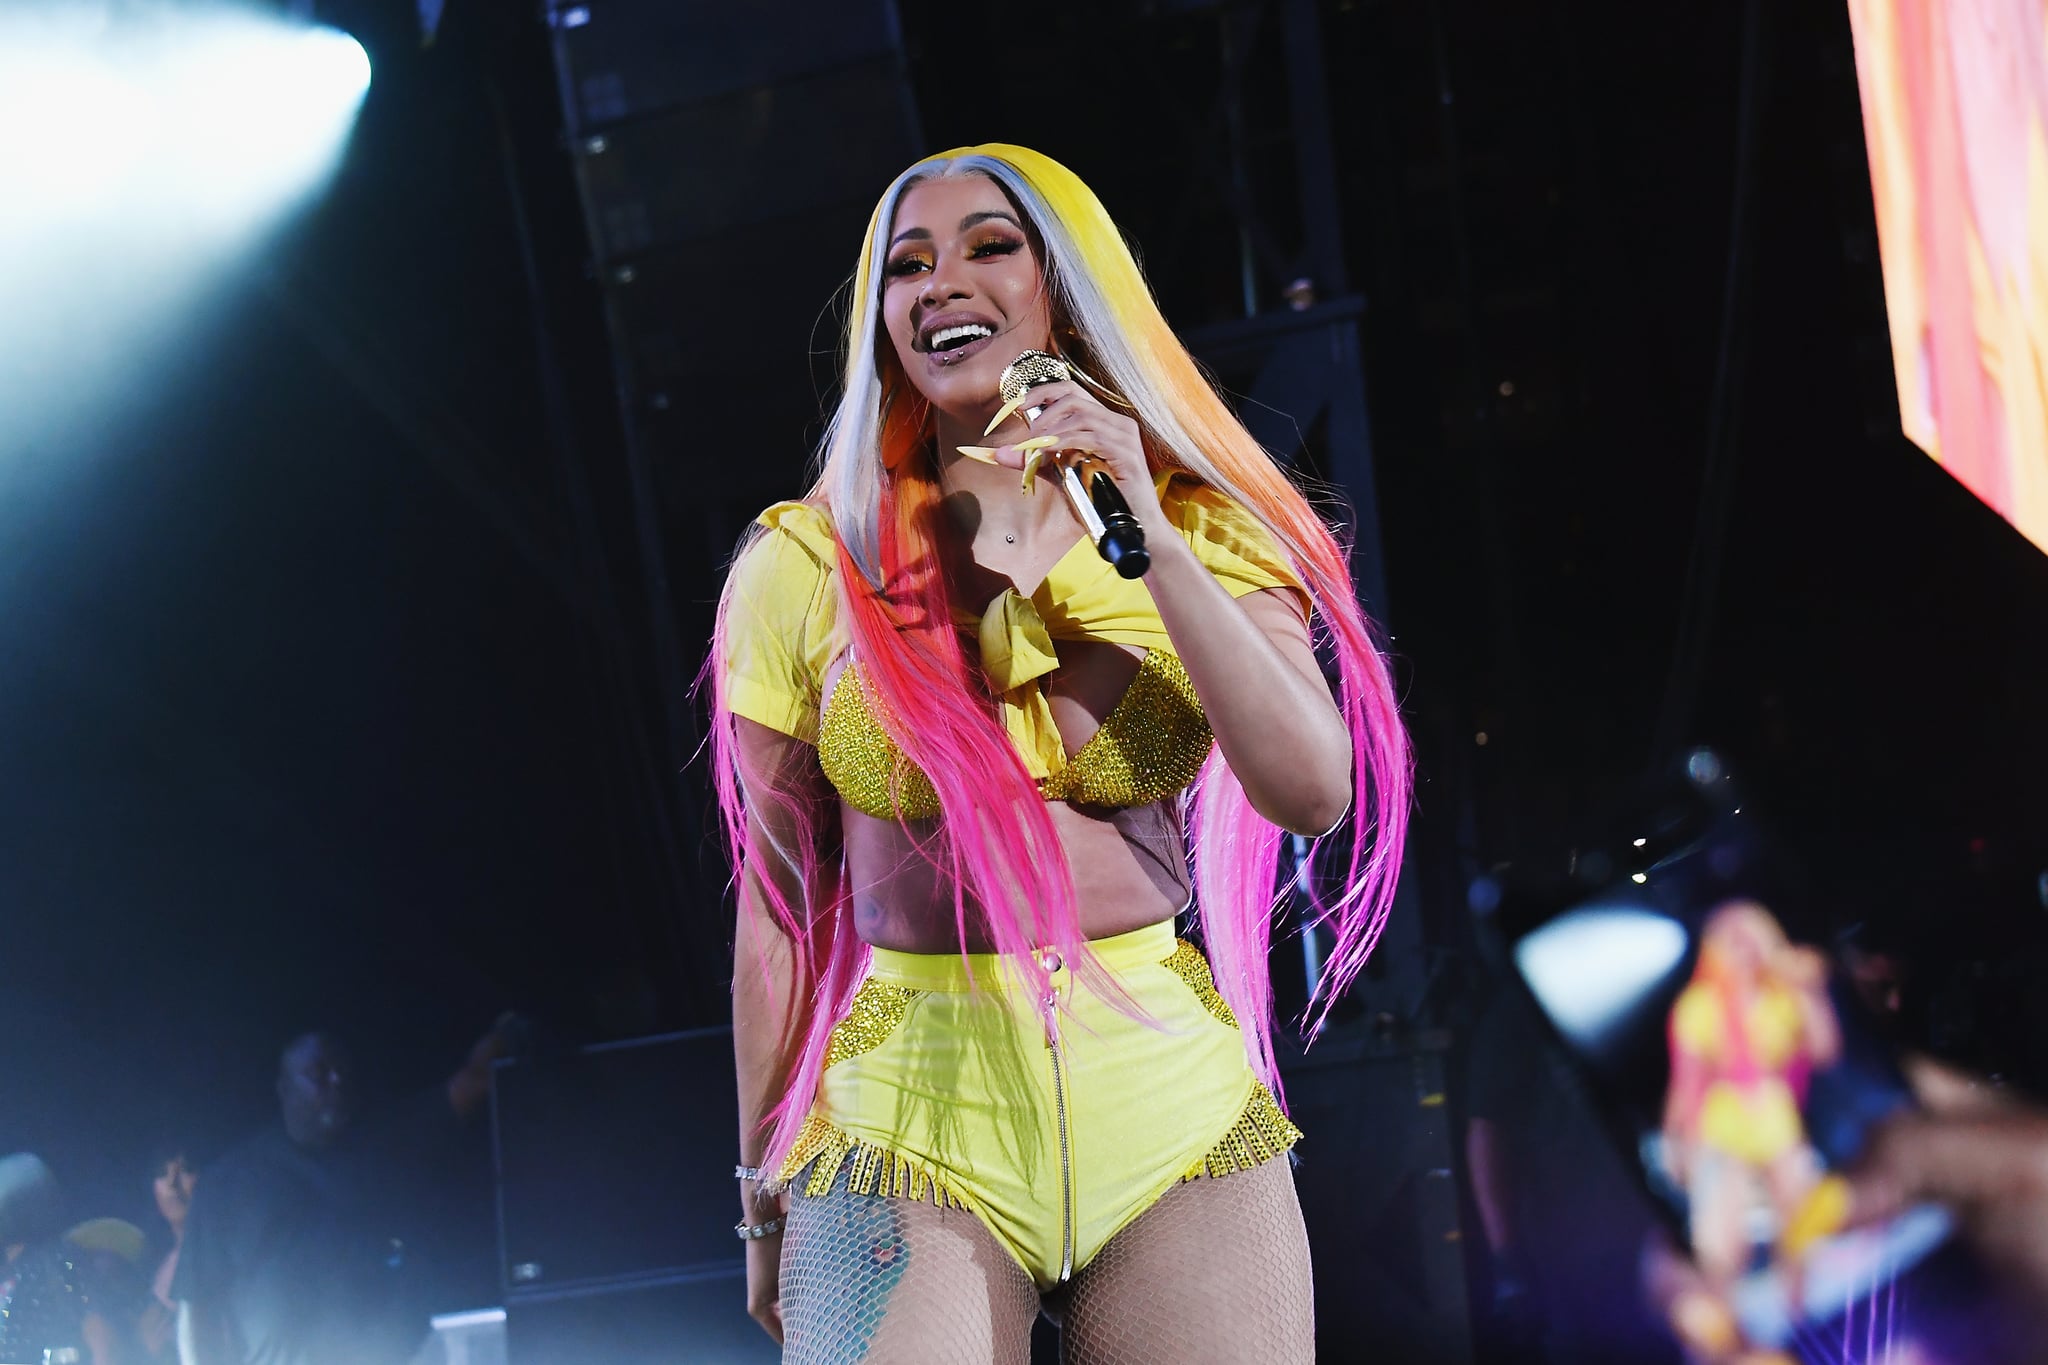 EAST RUTHERFORD, NEW JERSEY - JUNE 02: Cardi B performs at Summer Jam 2019 at MetLife Stadium on June 02, 2019 in East Rutherford, New Jersey. (Photo by Nicholas Hunt/Getty Images)